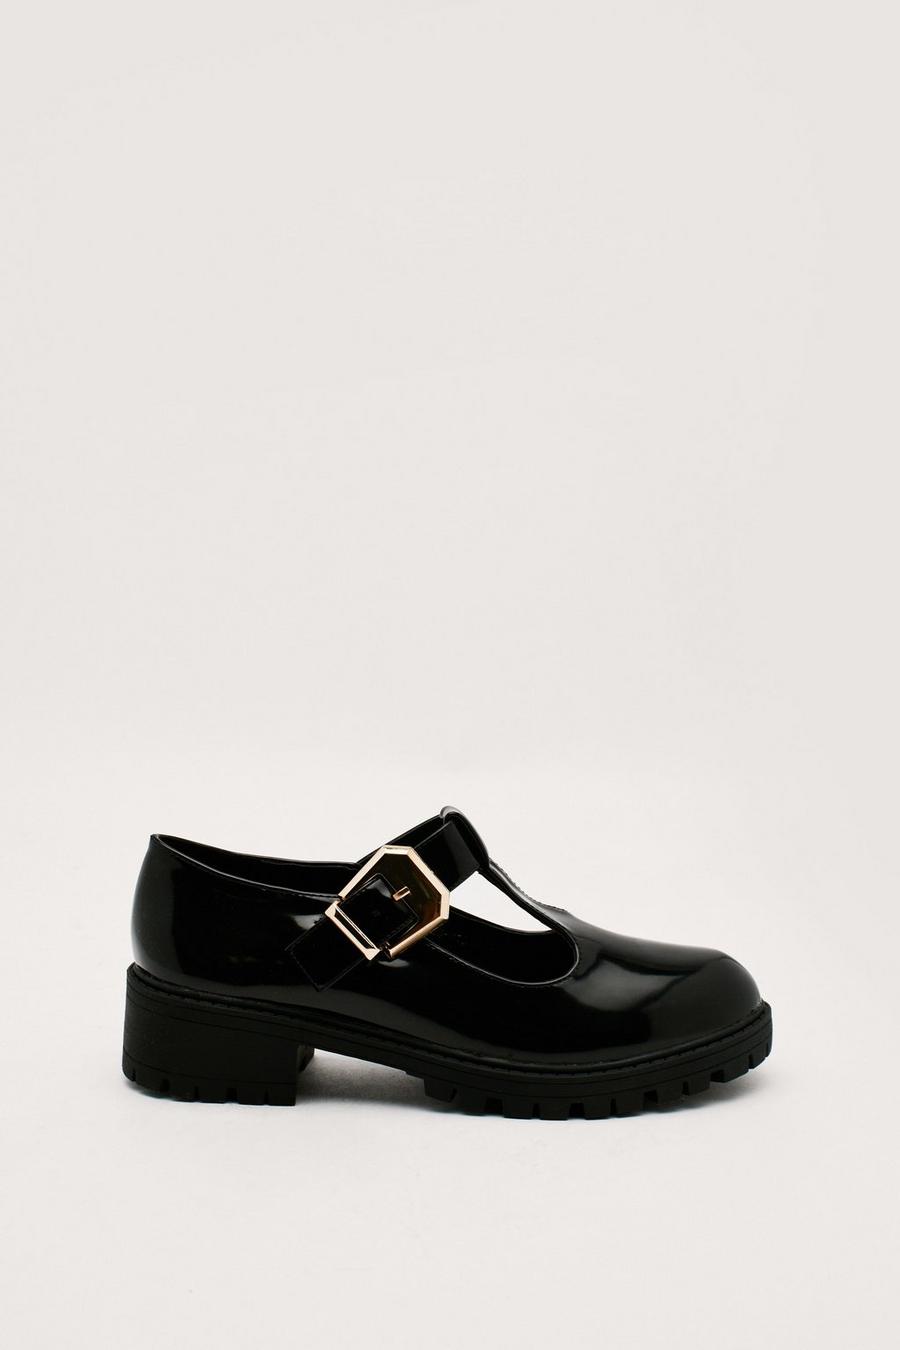 Patent Faux Leather Chunky T Bar Flat Shoes